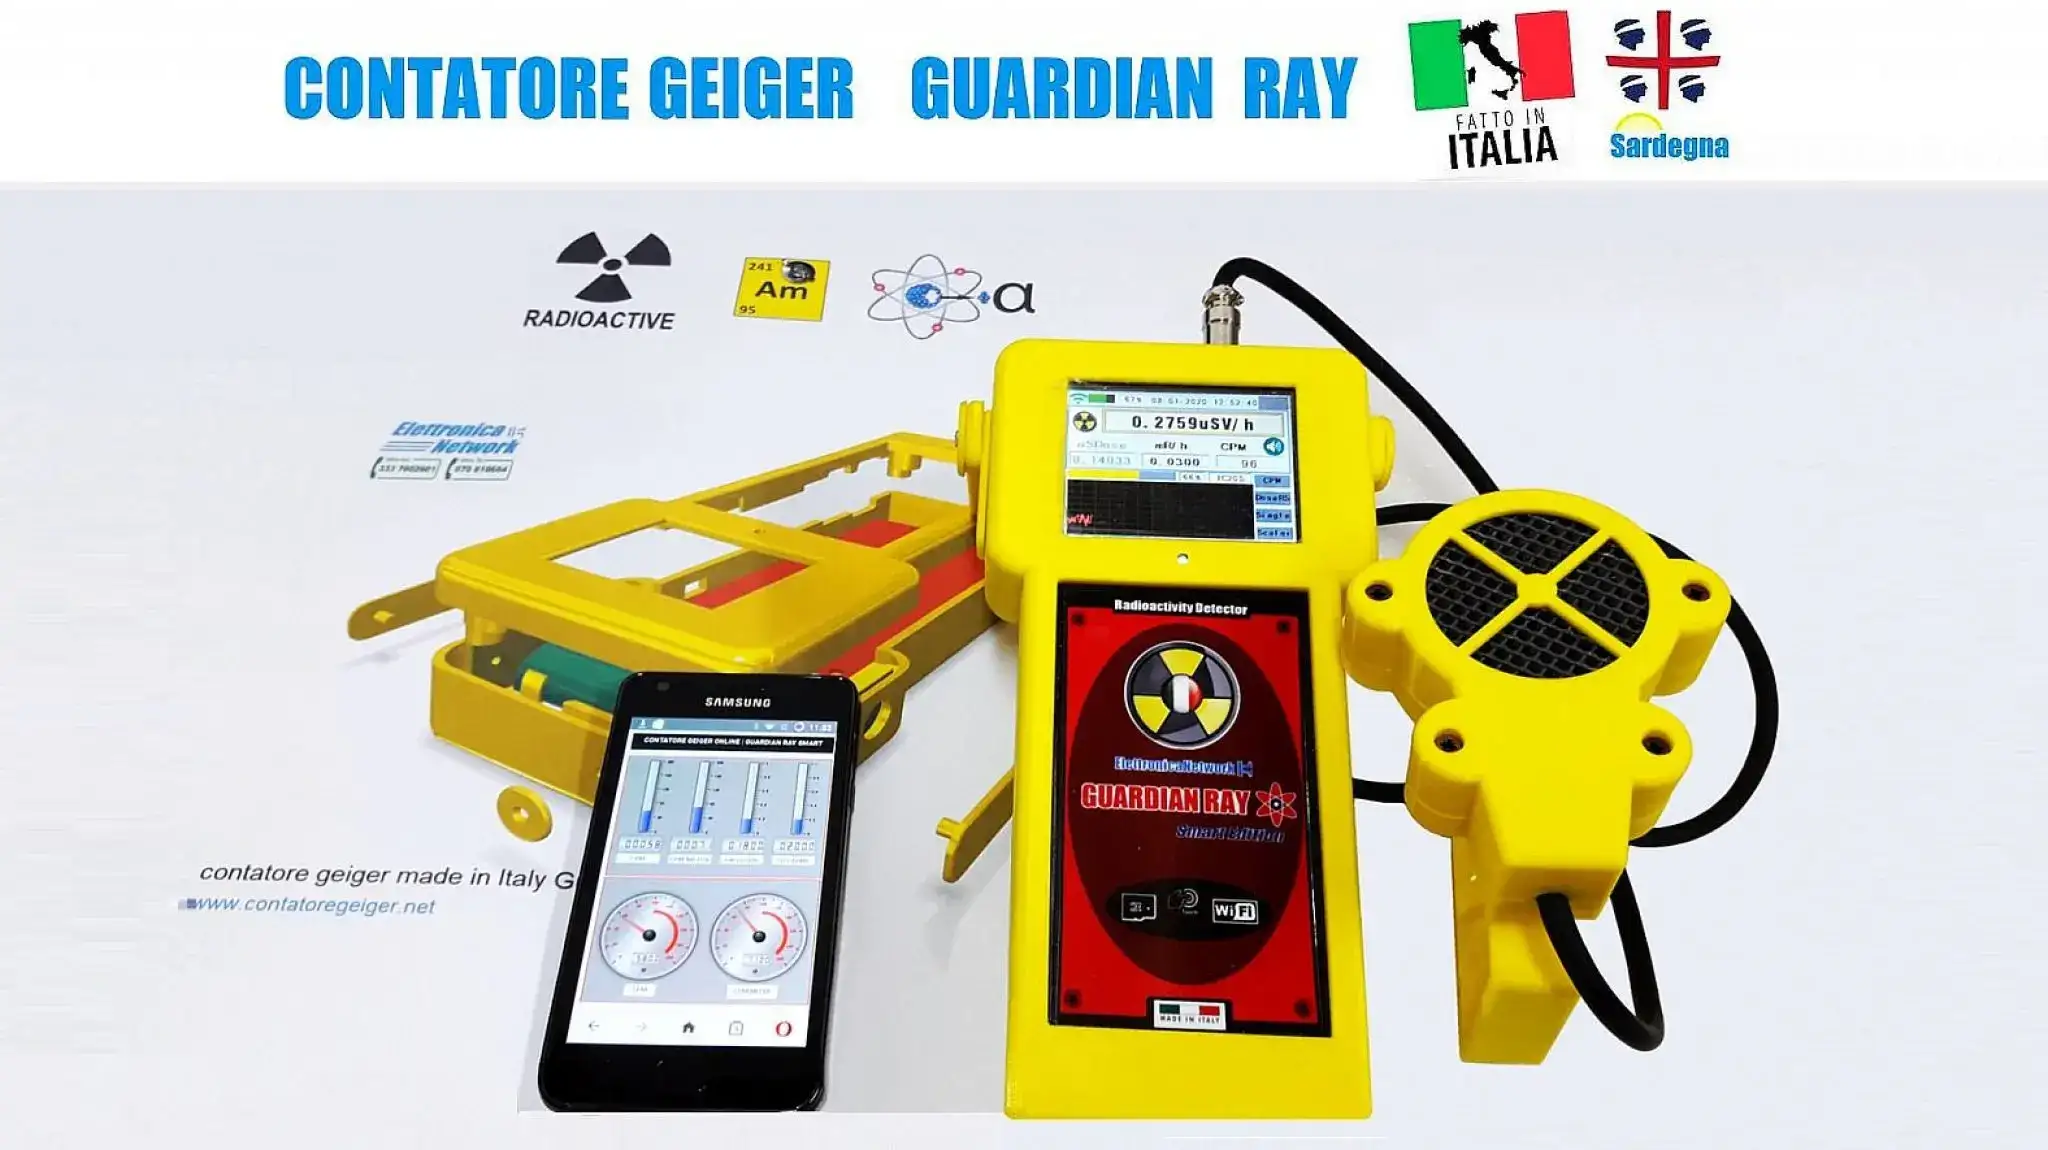 Contatore Geiger made in Italy